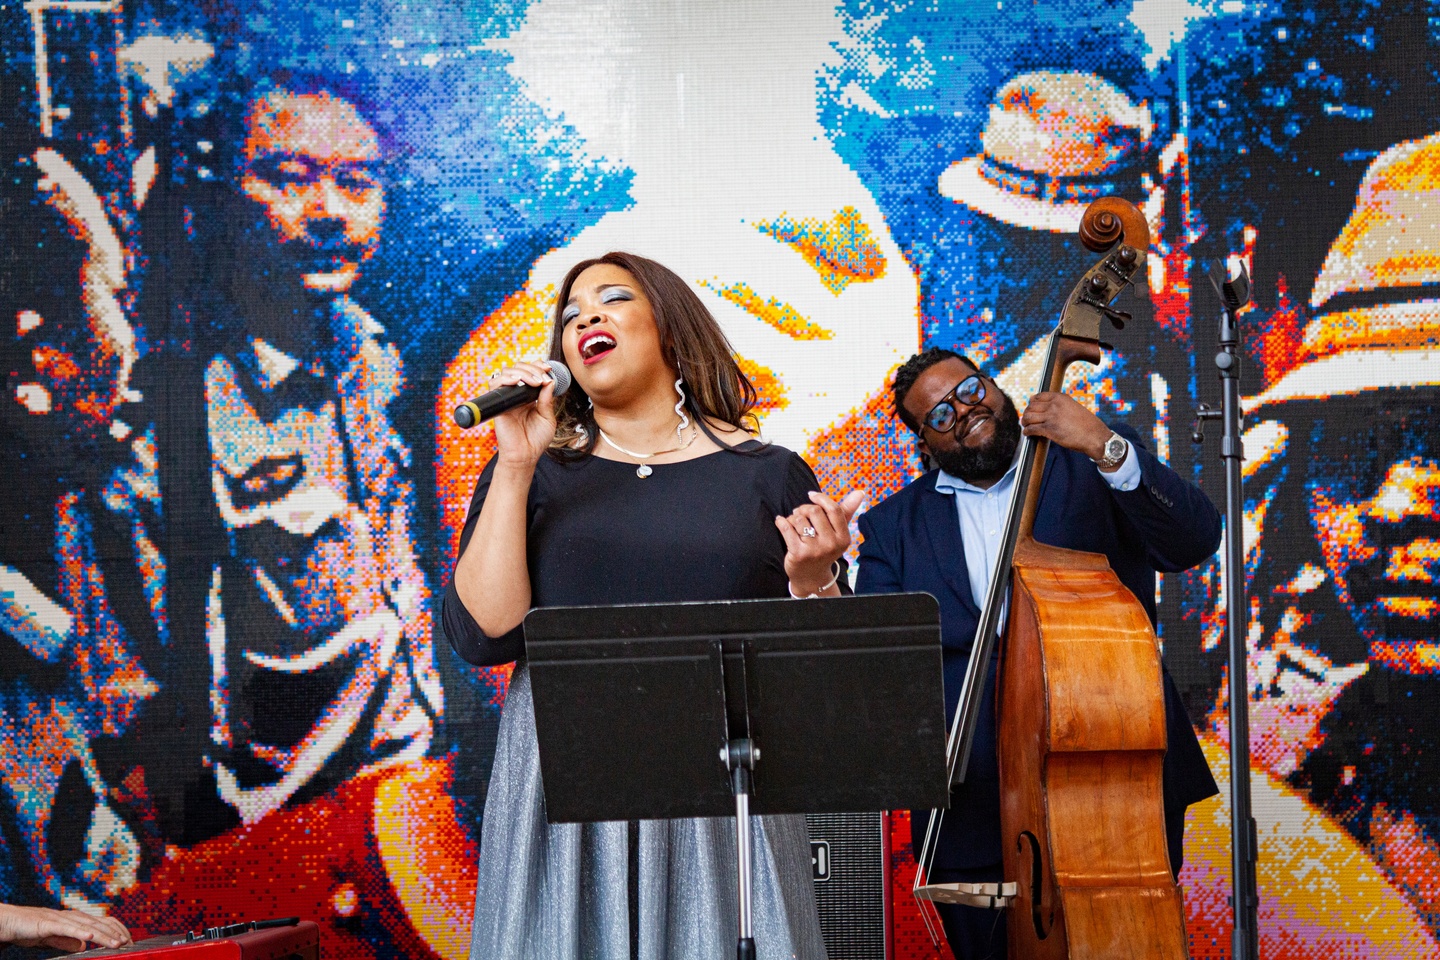 A woman singing into a microphone and a man playing an upright bass stand before a colorful artwork that includes people's faces